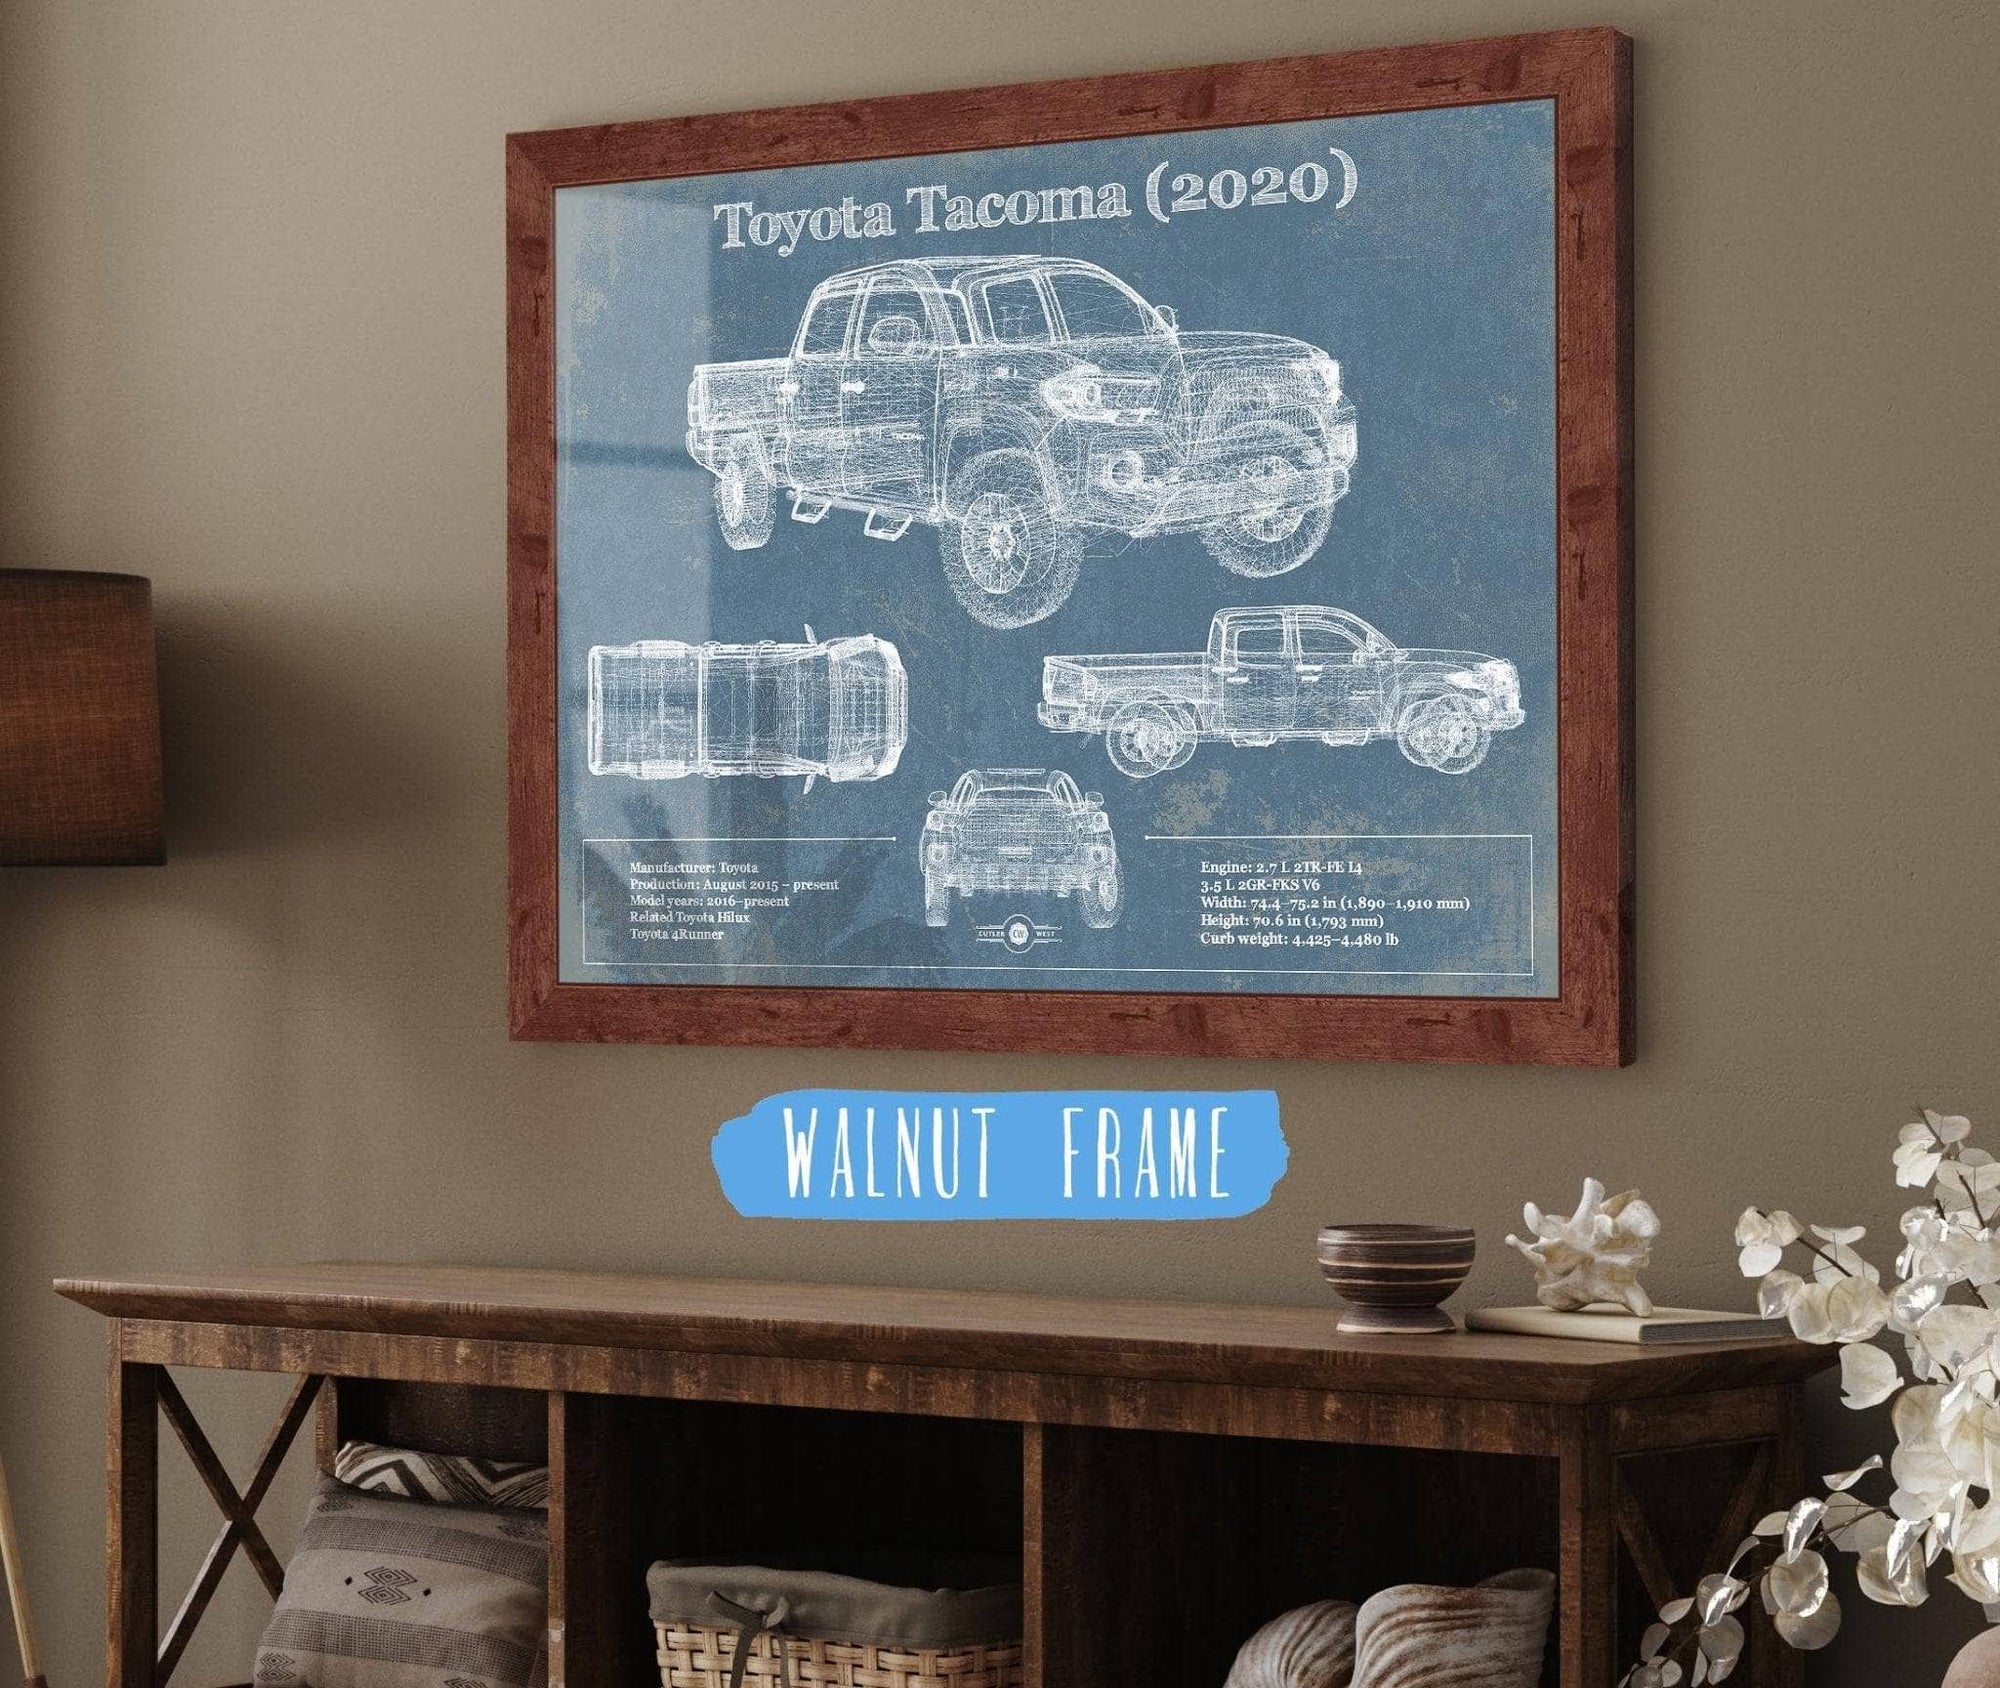 Cutler West Toyota Collection Toyota Tacoma (2020) Vintage Blueprint Truck Print